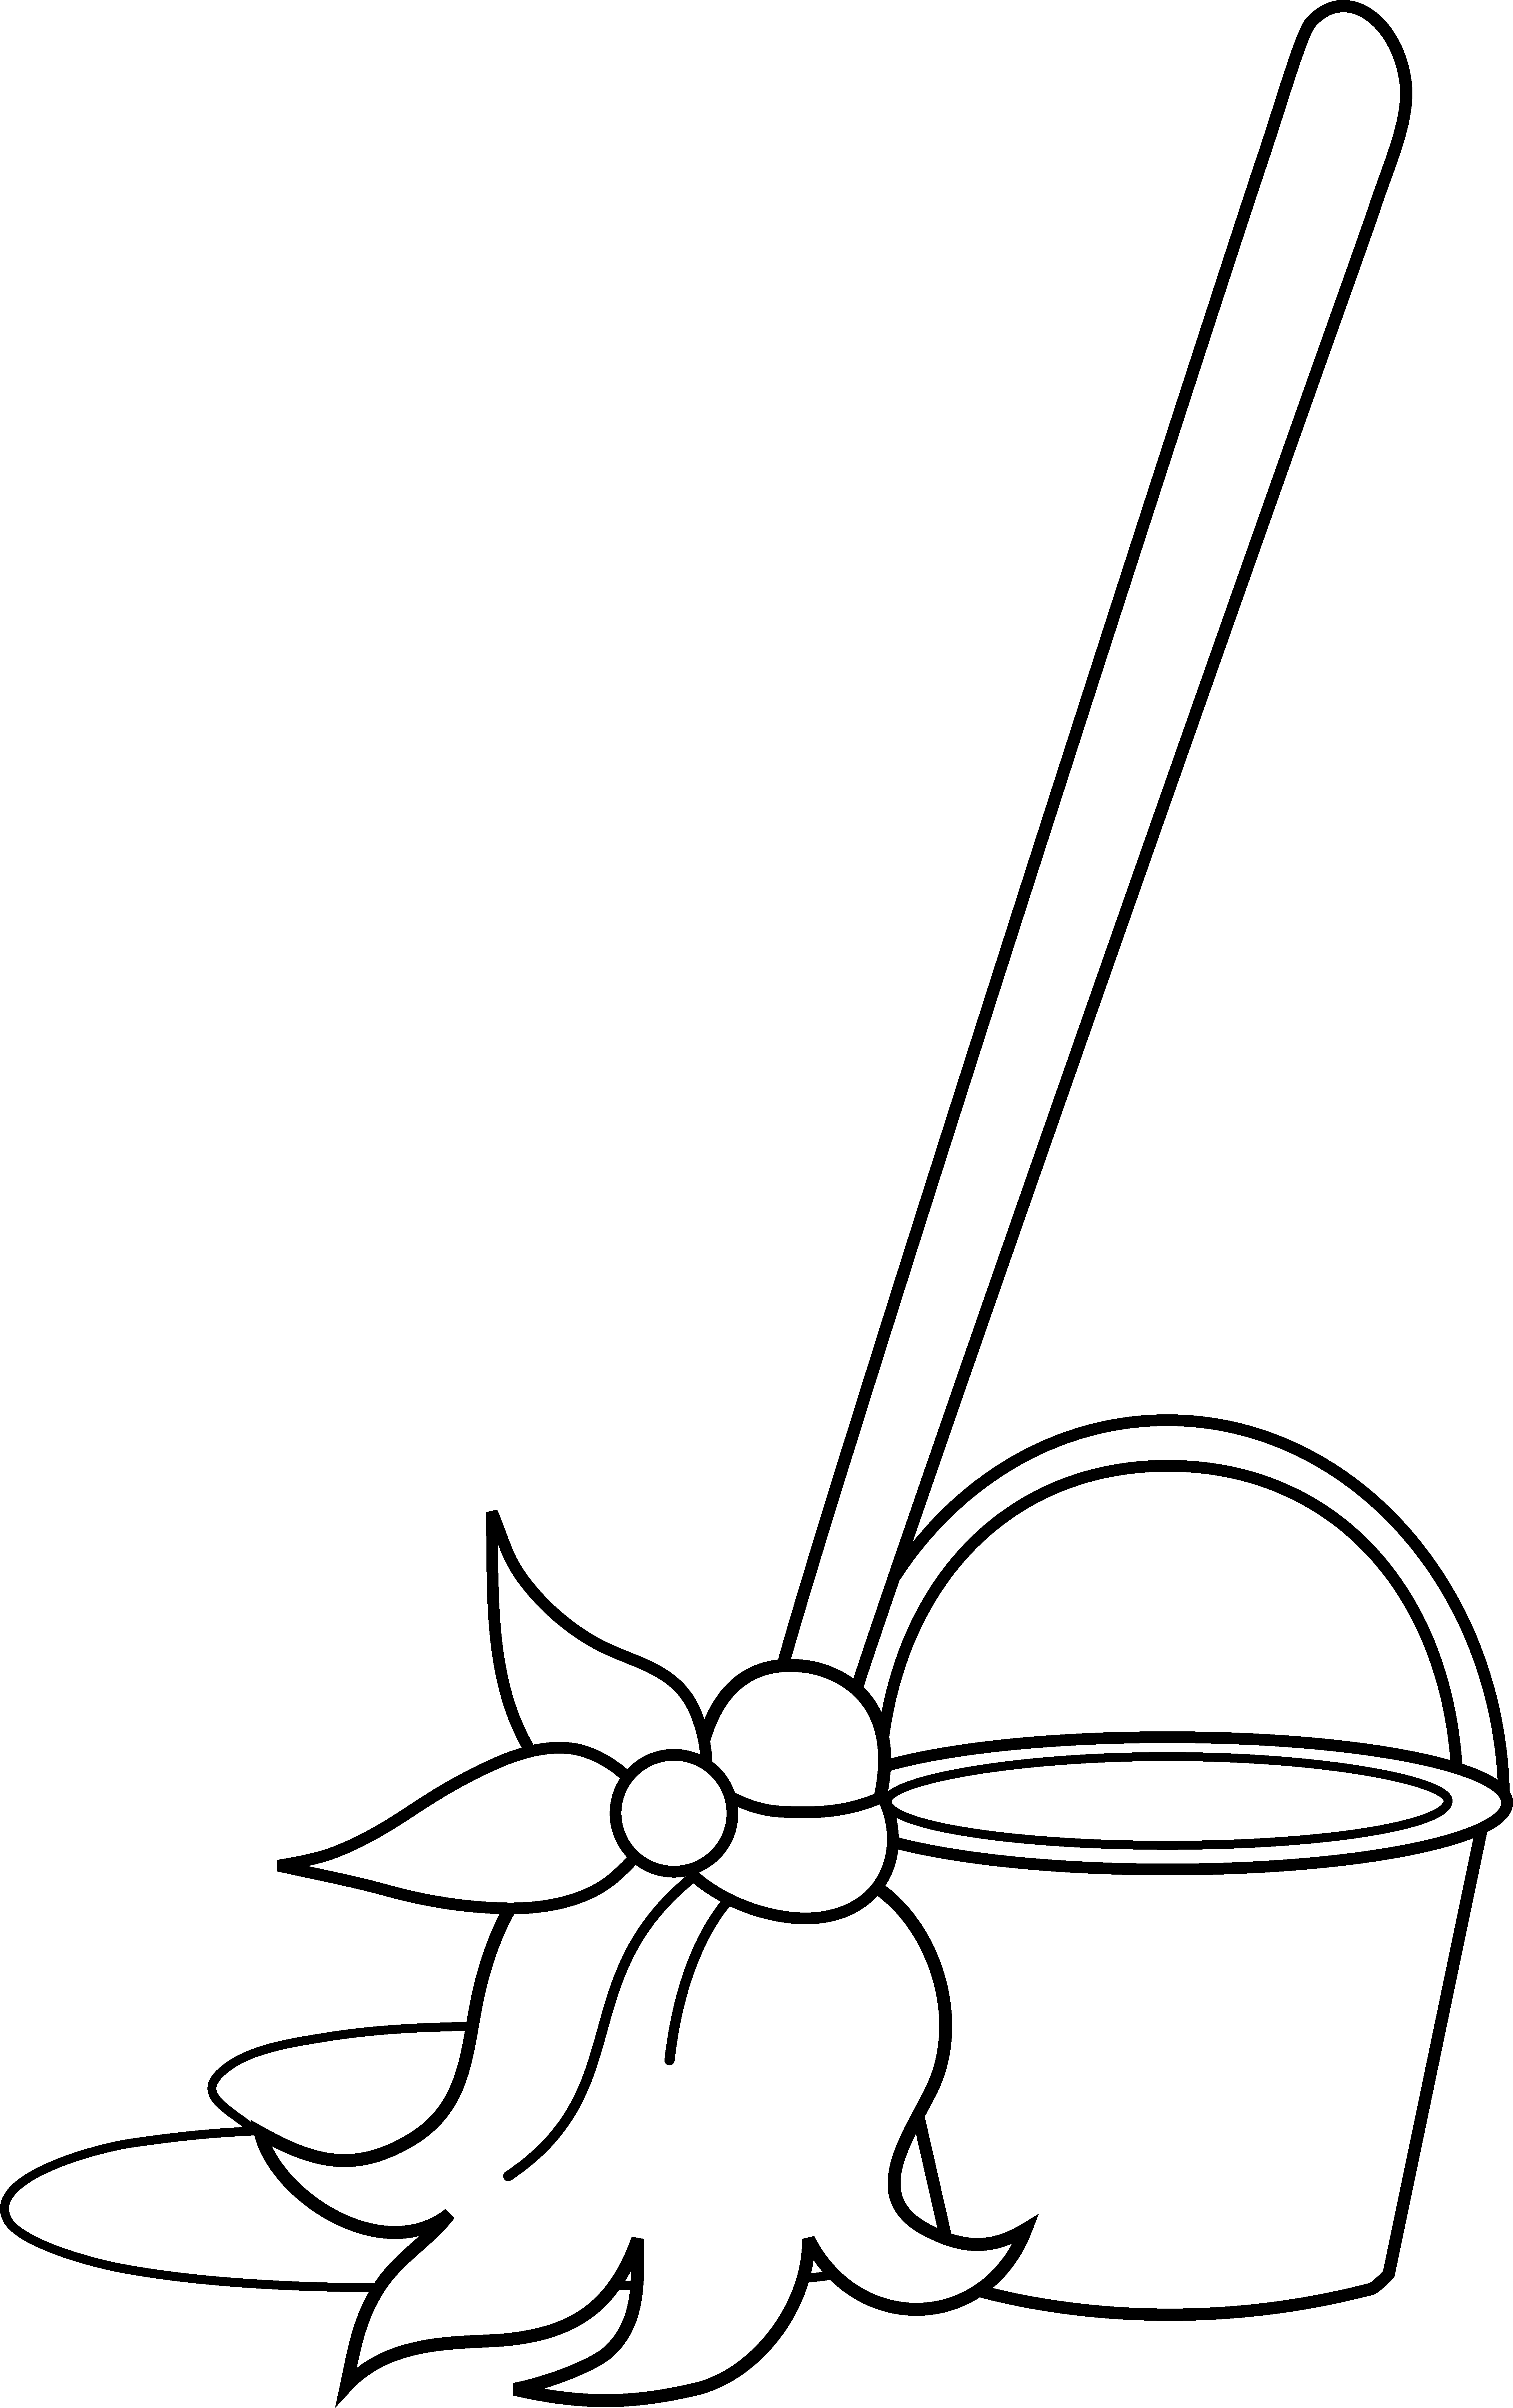 Mop and coloring page. Clean clipart bucket